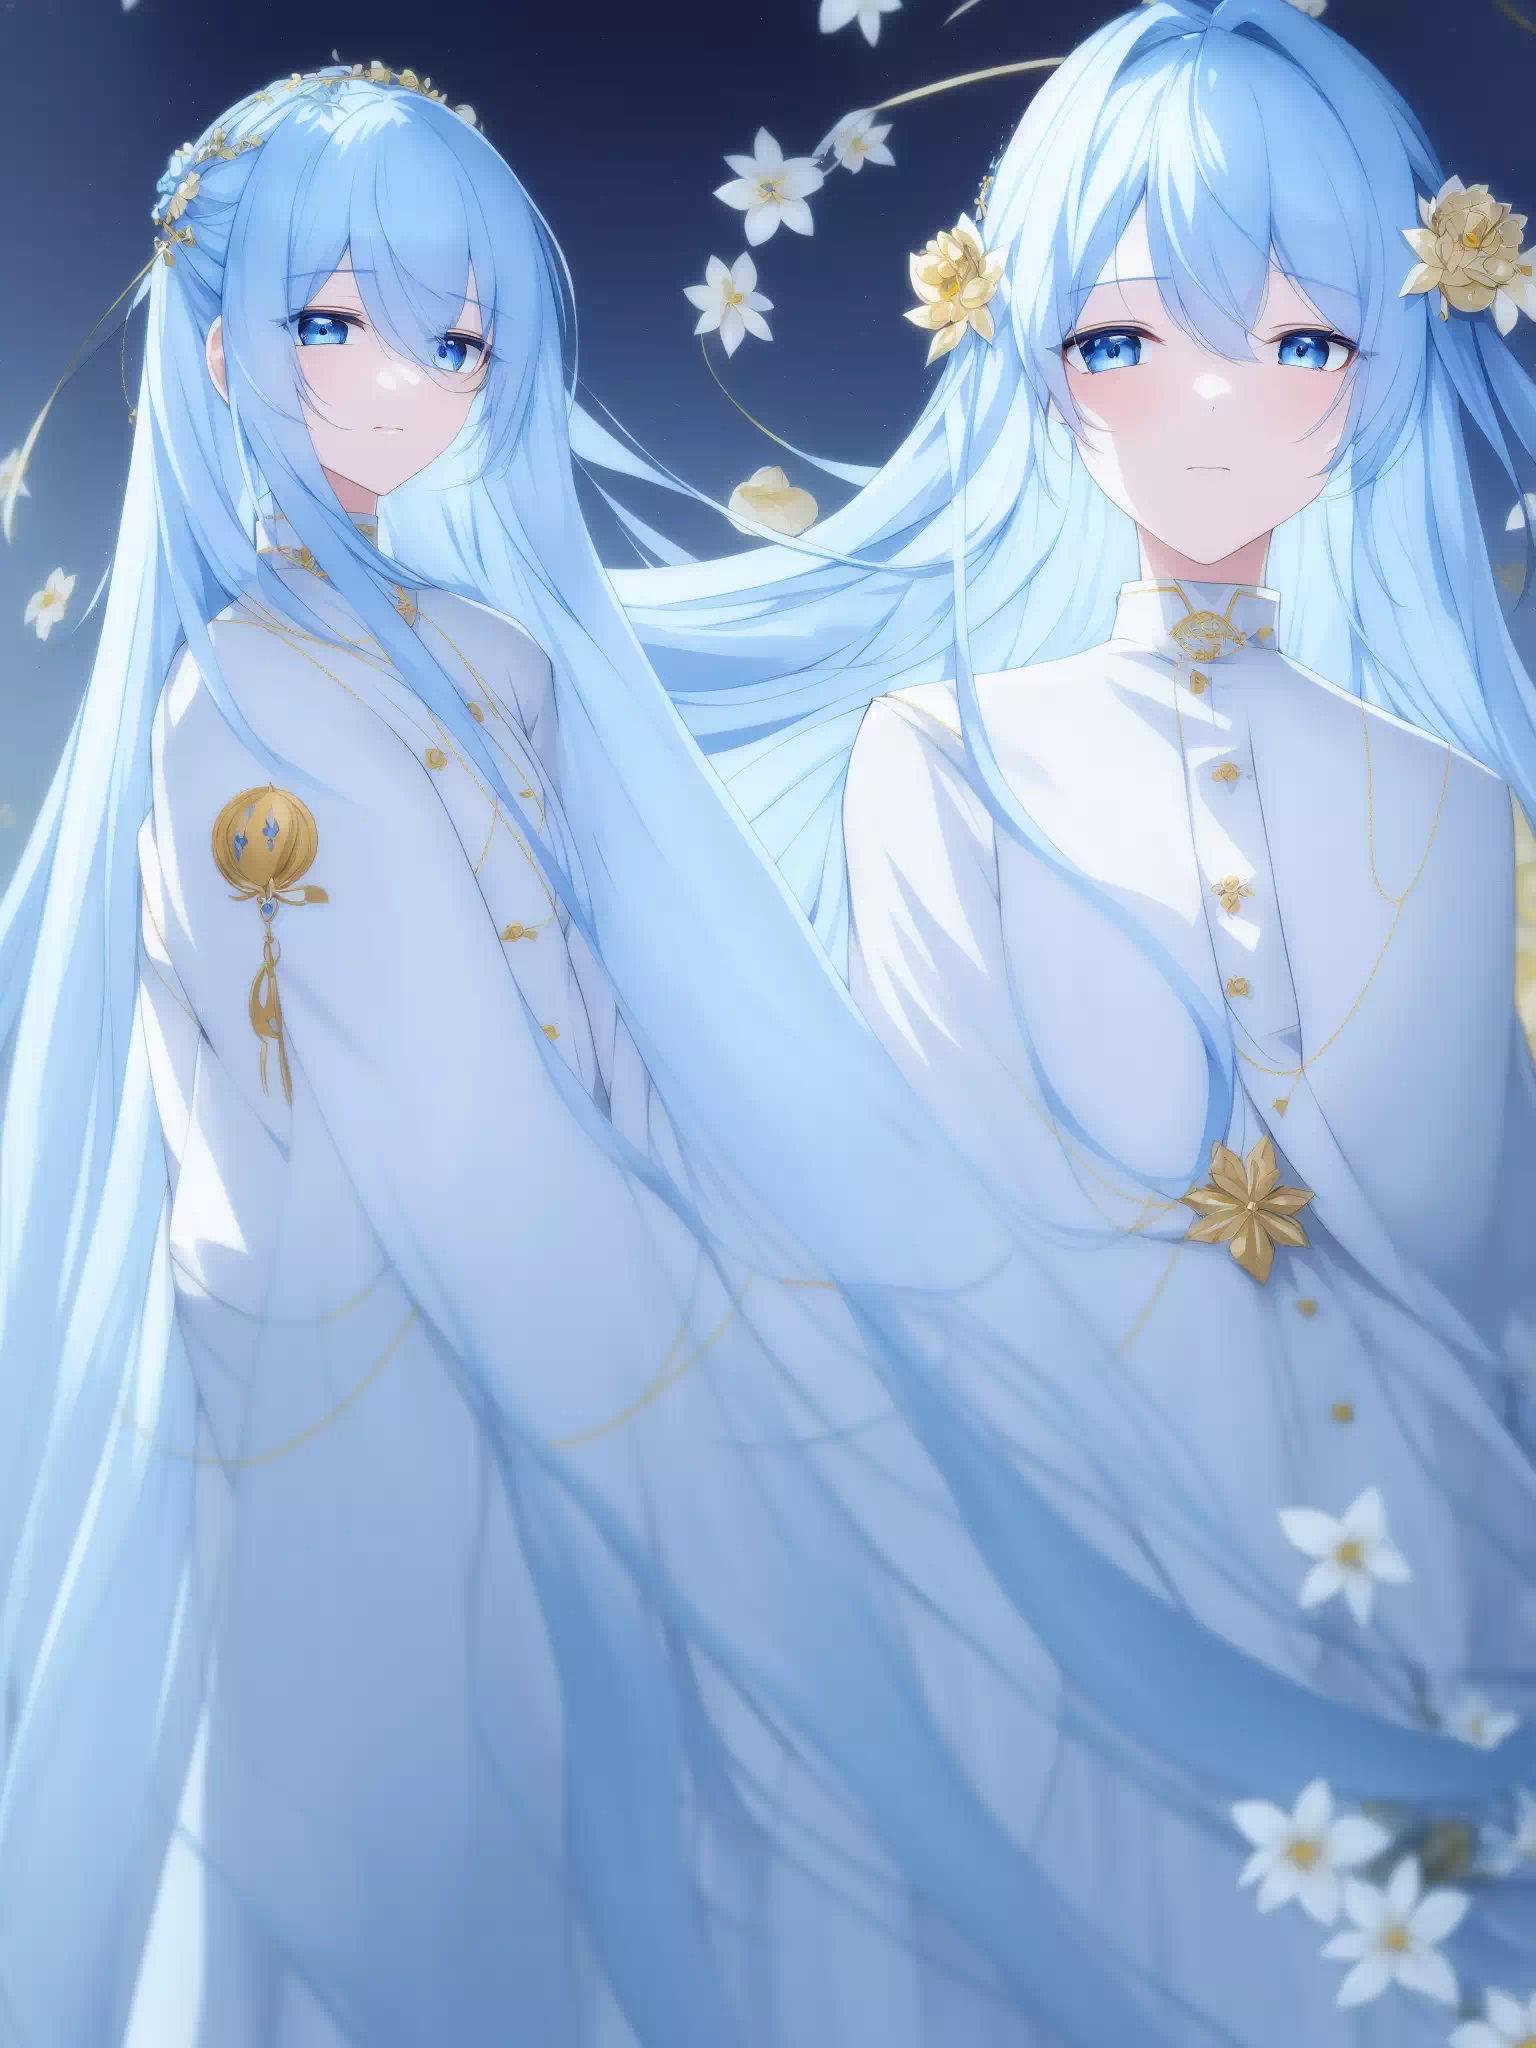 Royal twins (or sisters)